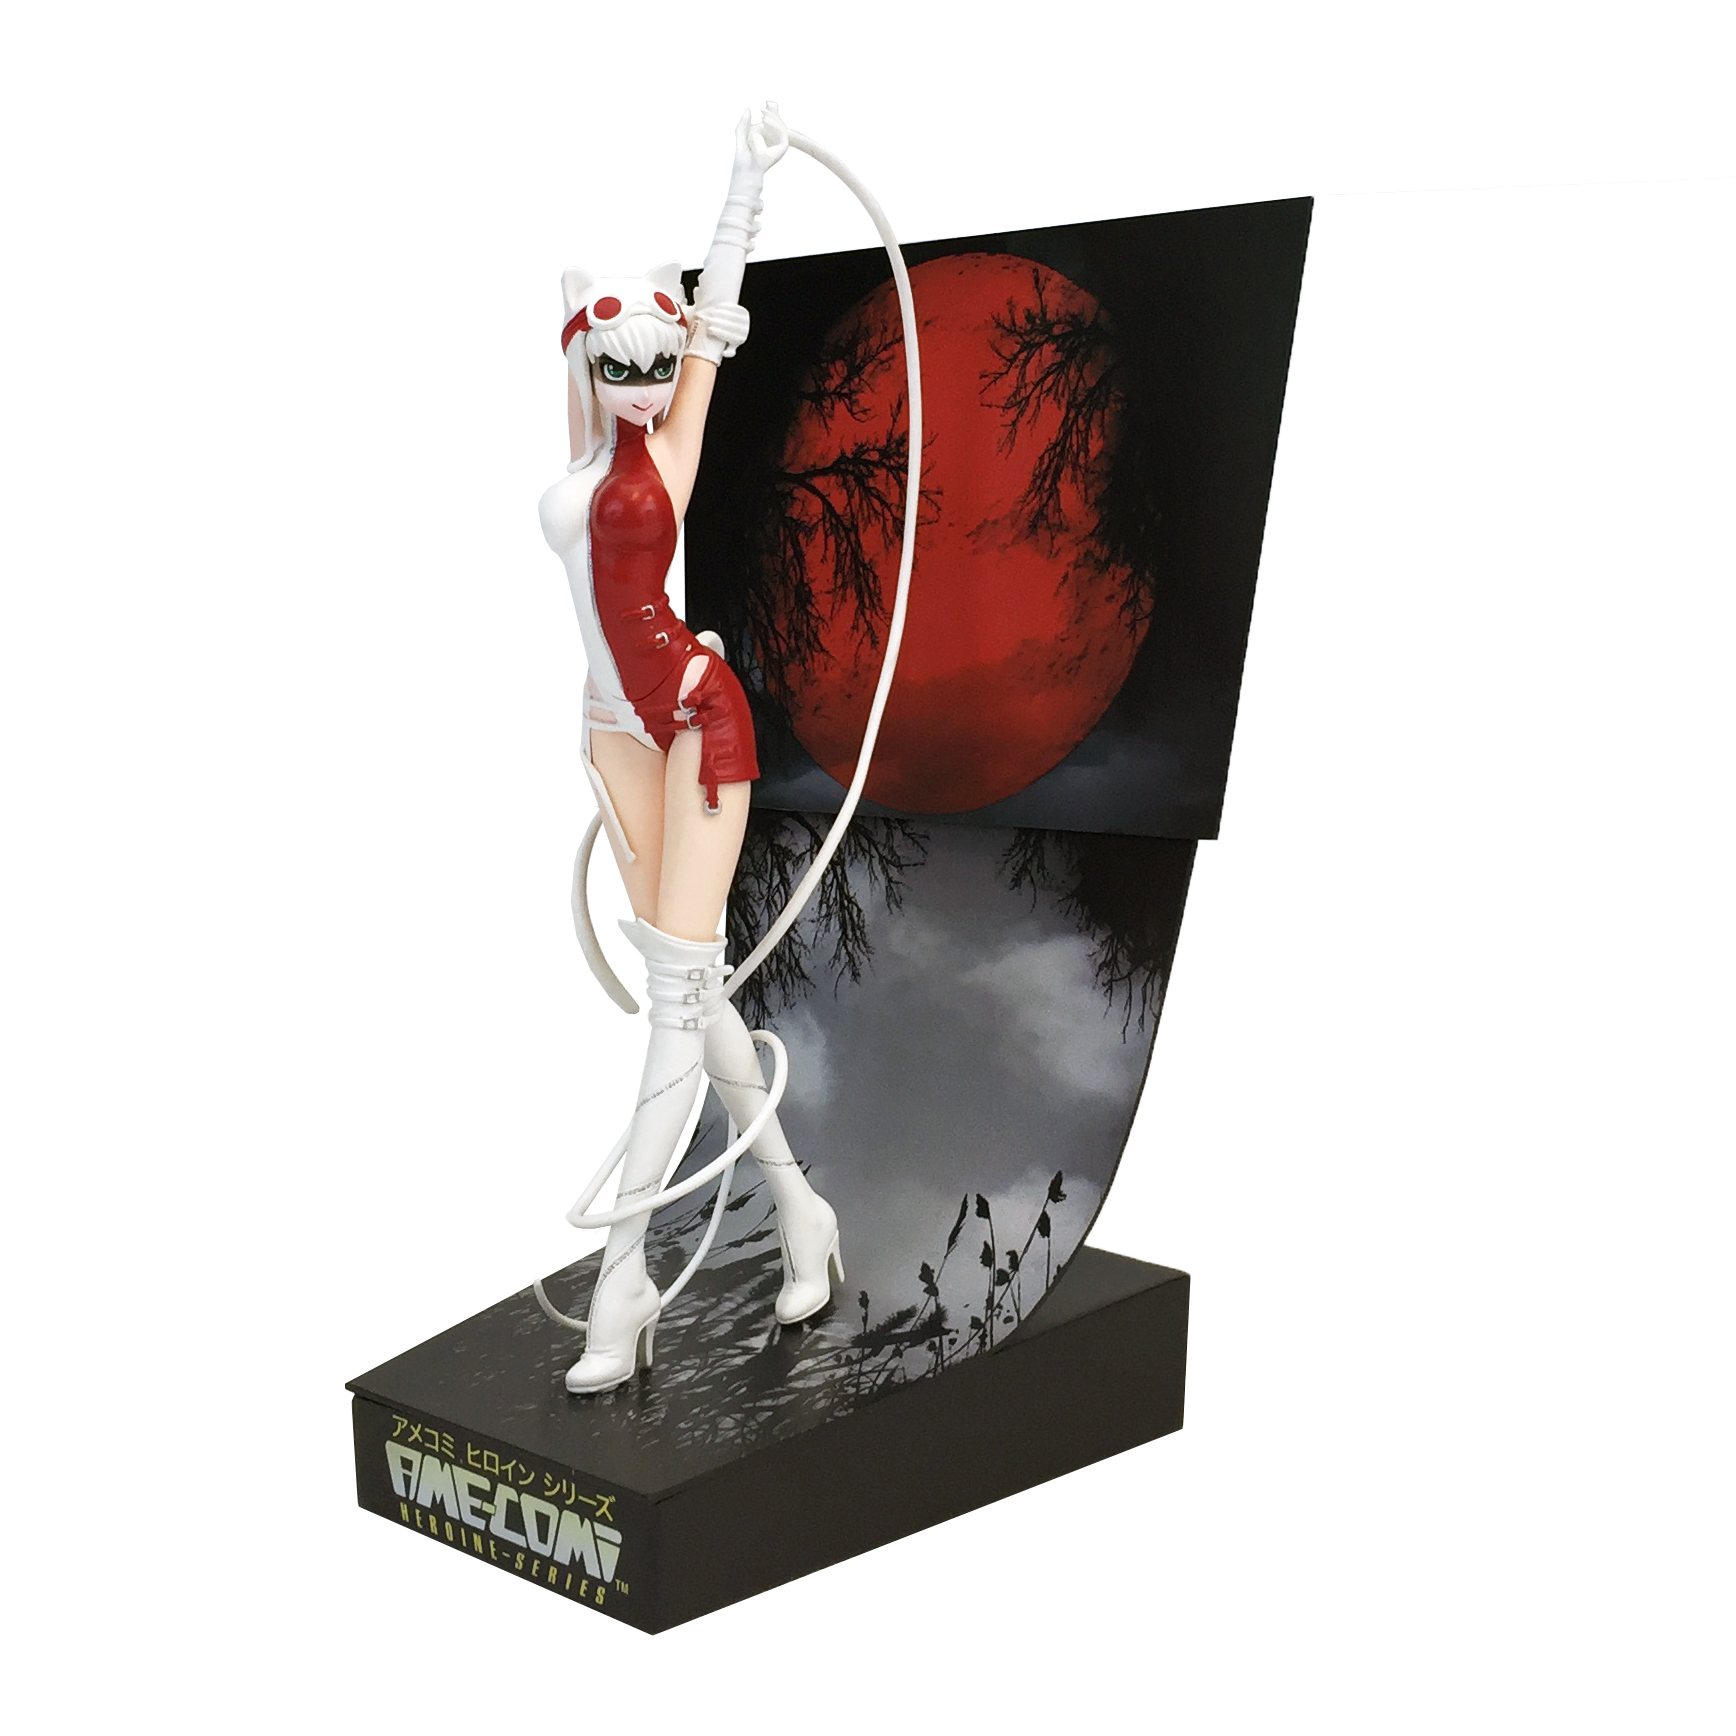 Ame-Comi Heroine Series ~ CATWOMAN ~ 10" Premium Motion Statue by Factory Enter. 